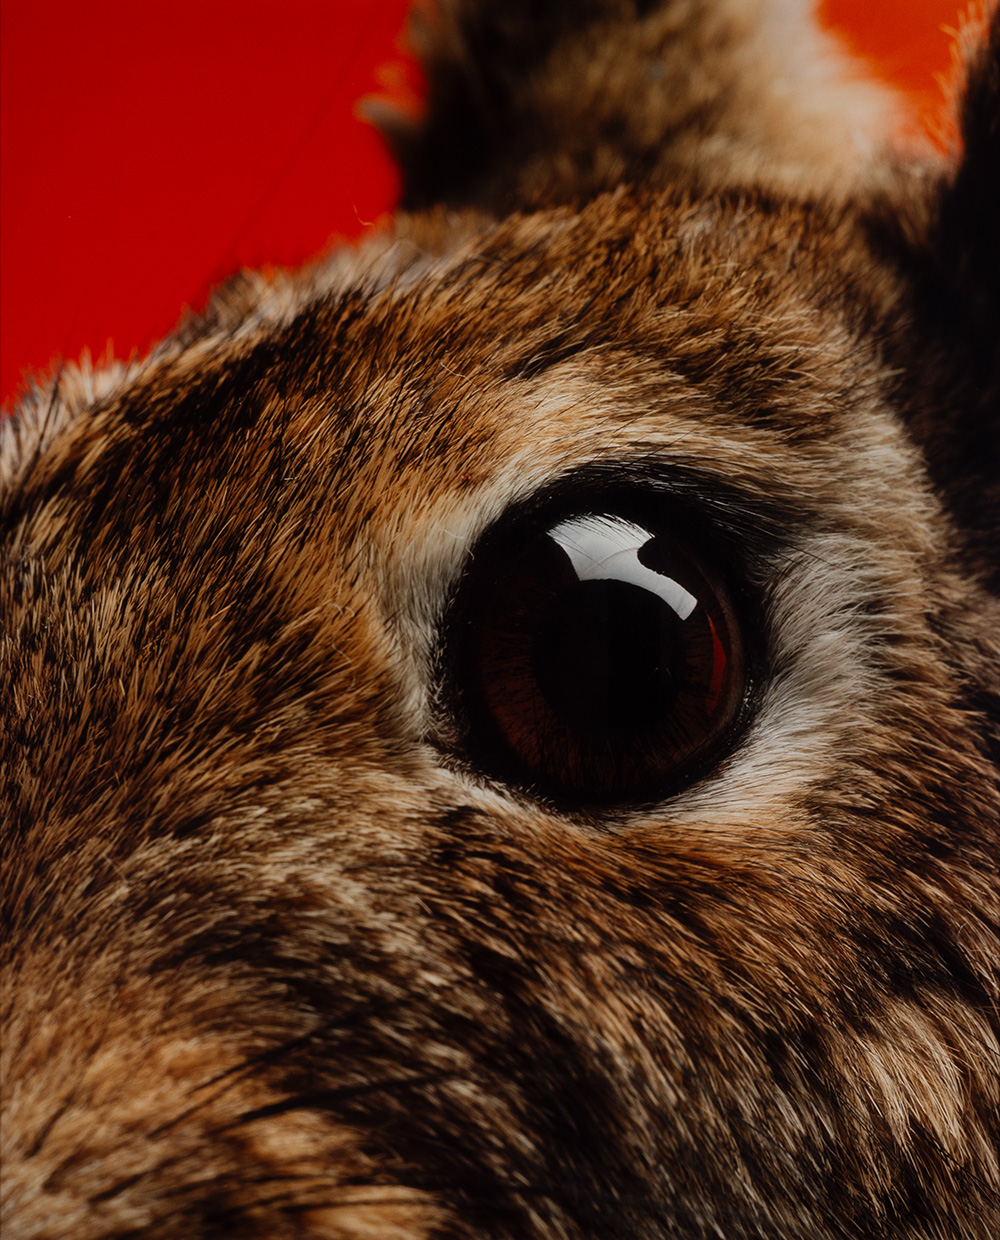 A close up on a rabbit's eye with a red wall behind it.